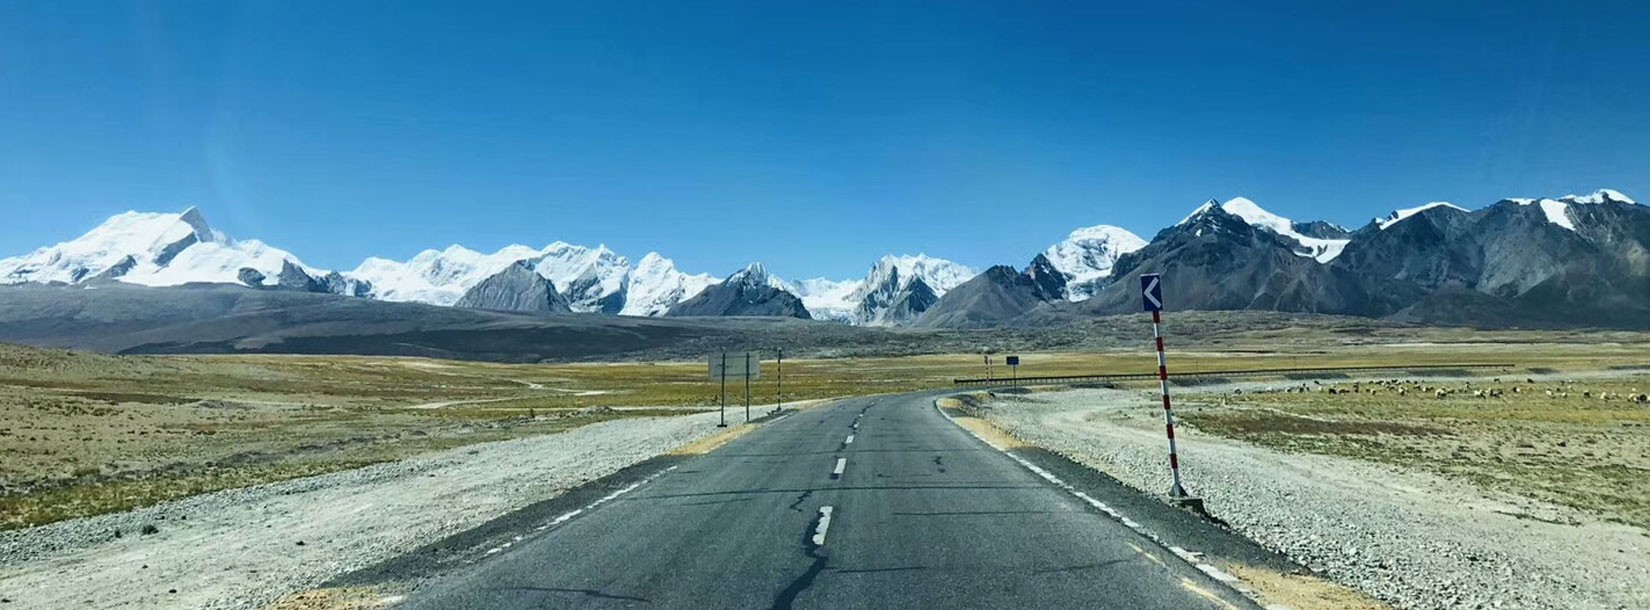 Highway to Mt. Kailash